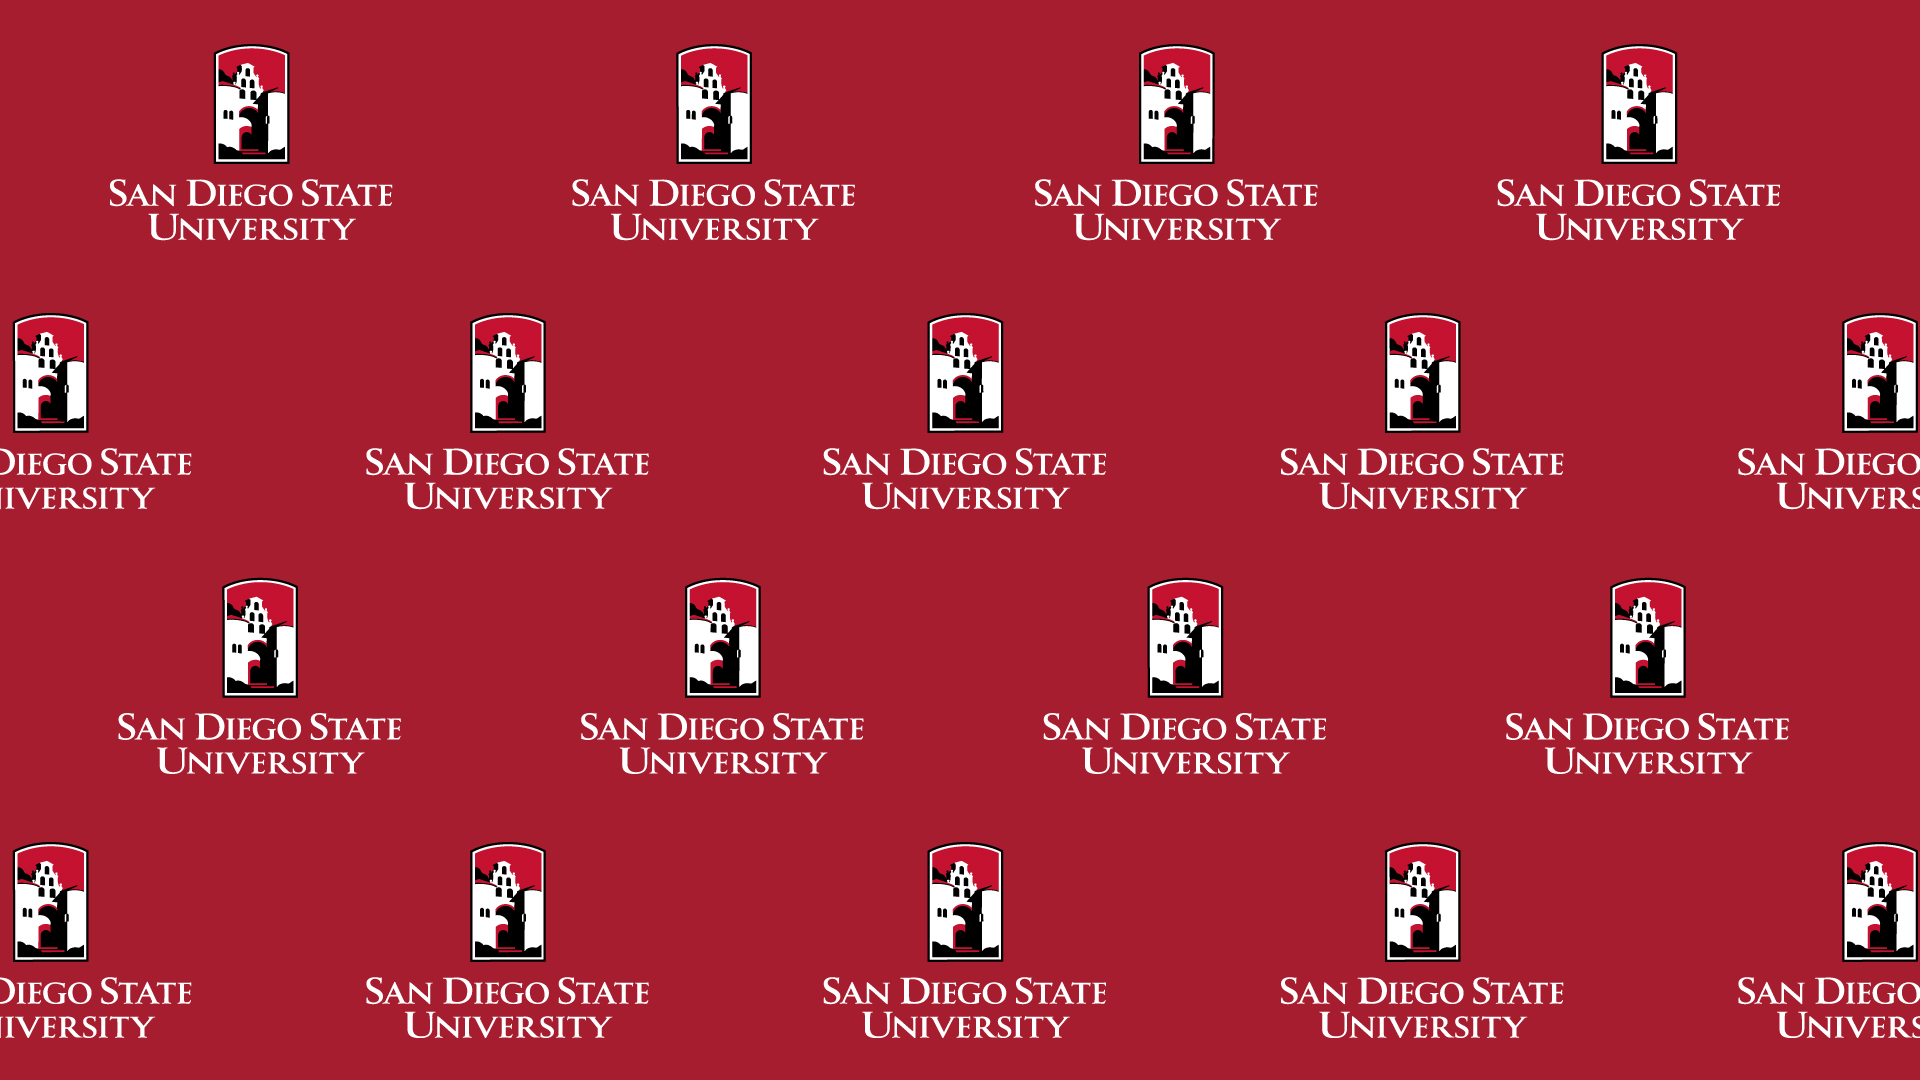 SDSU logo repeated on red background.